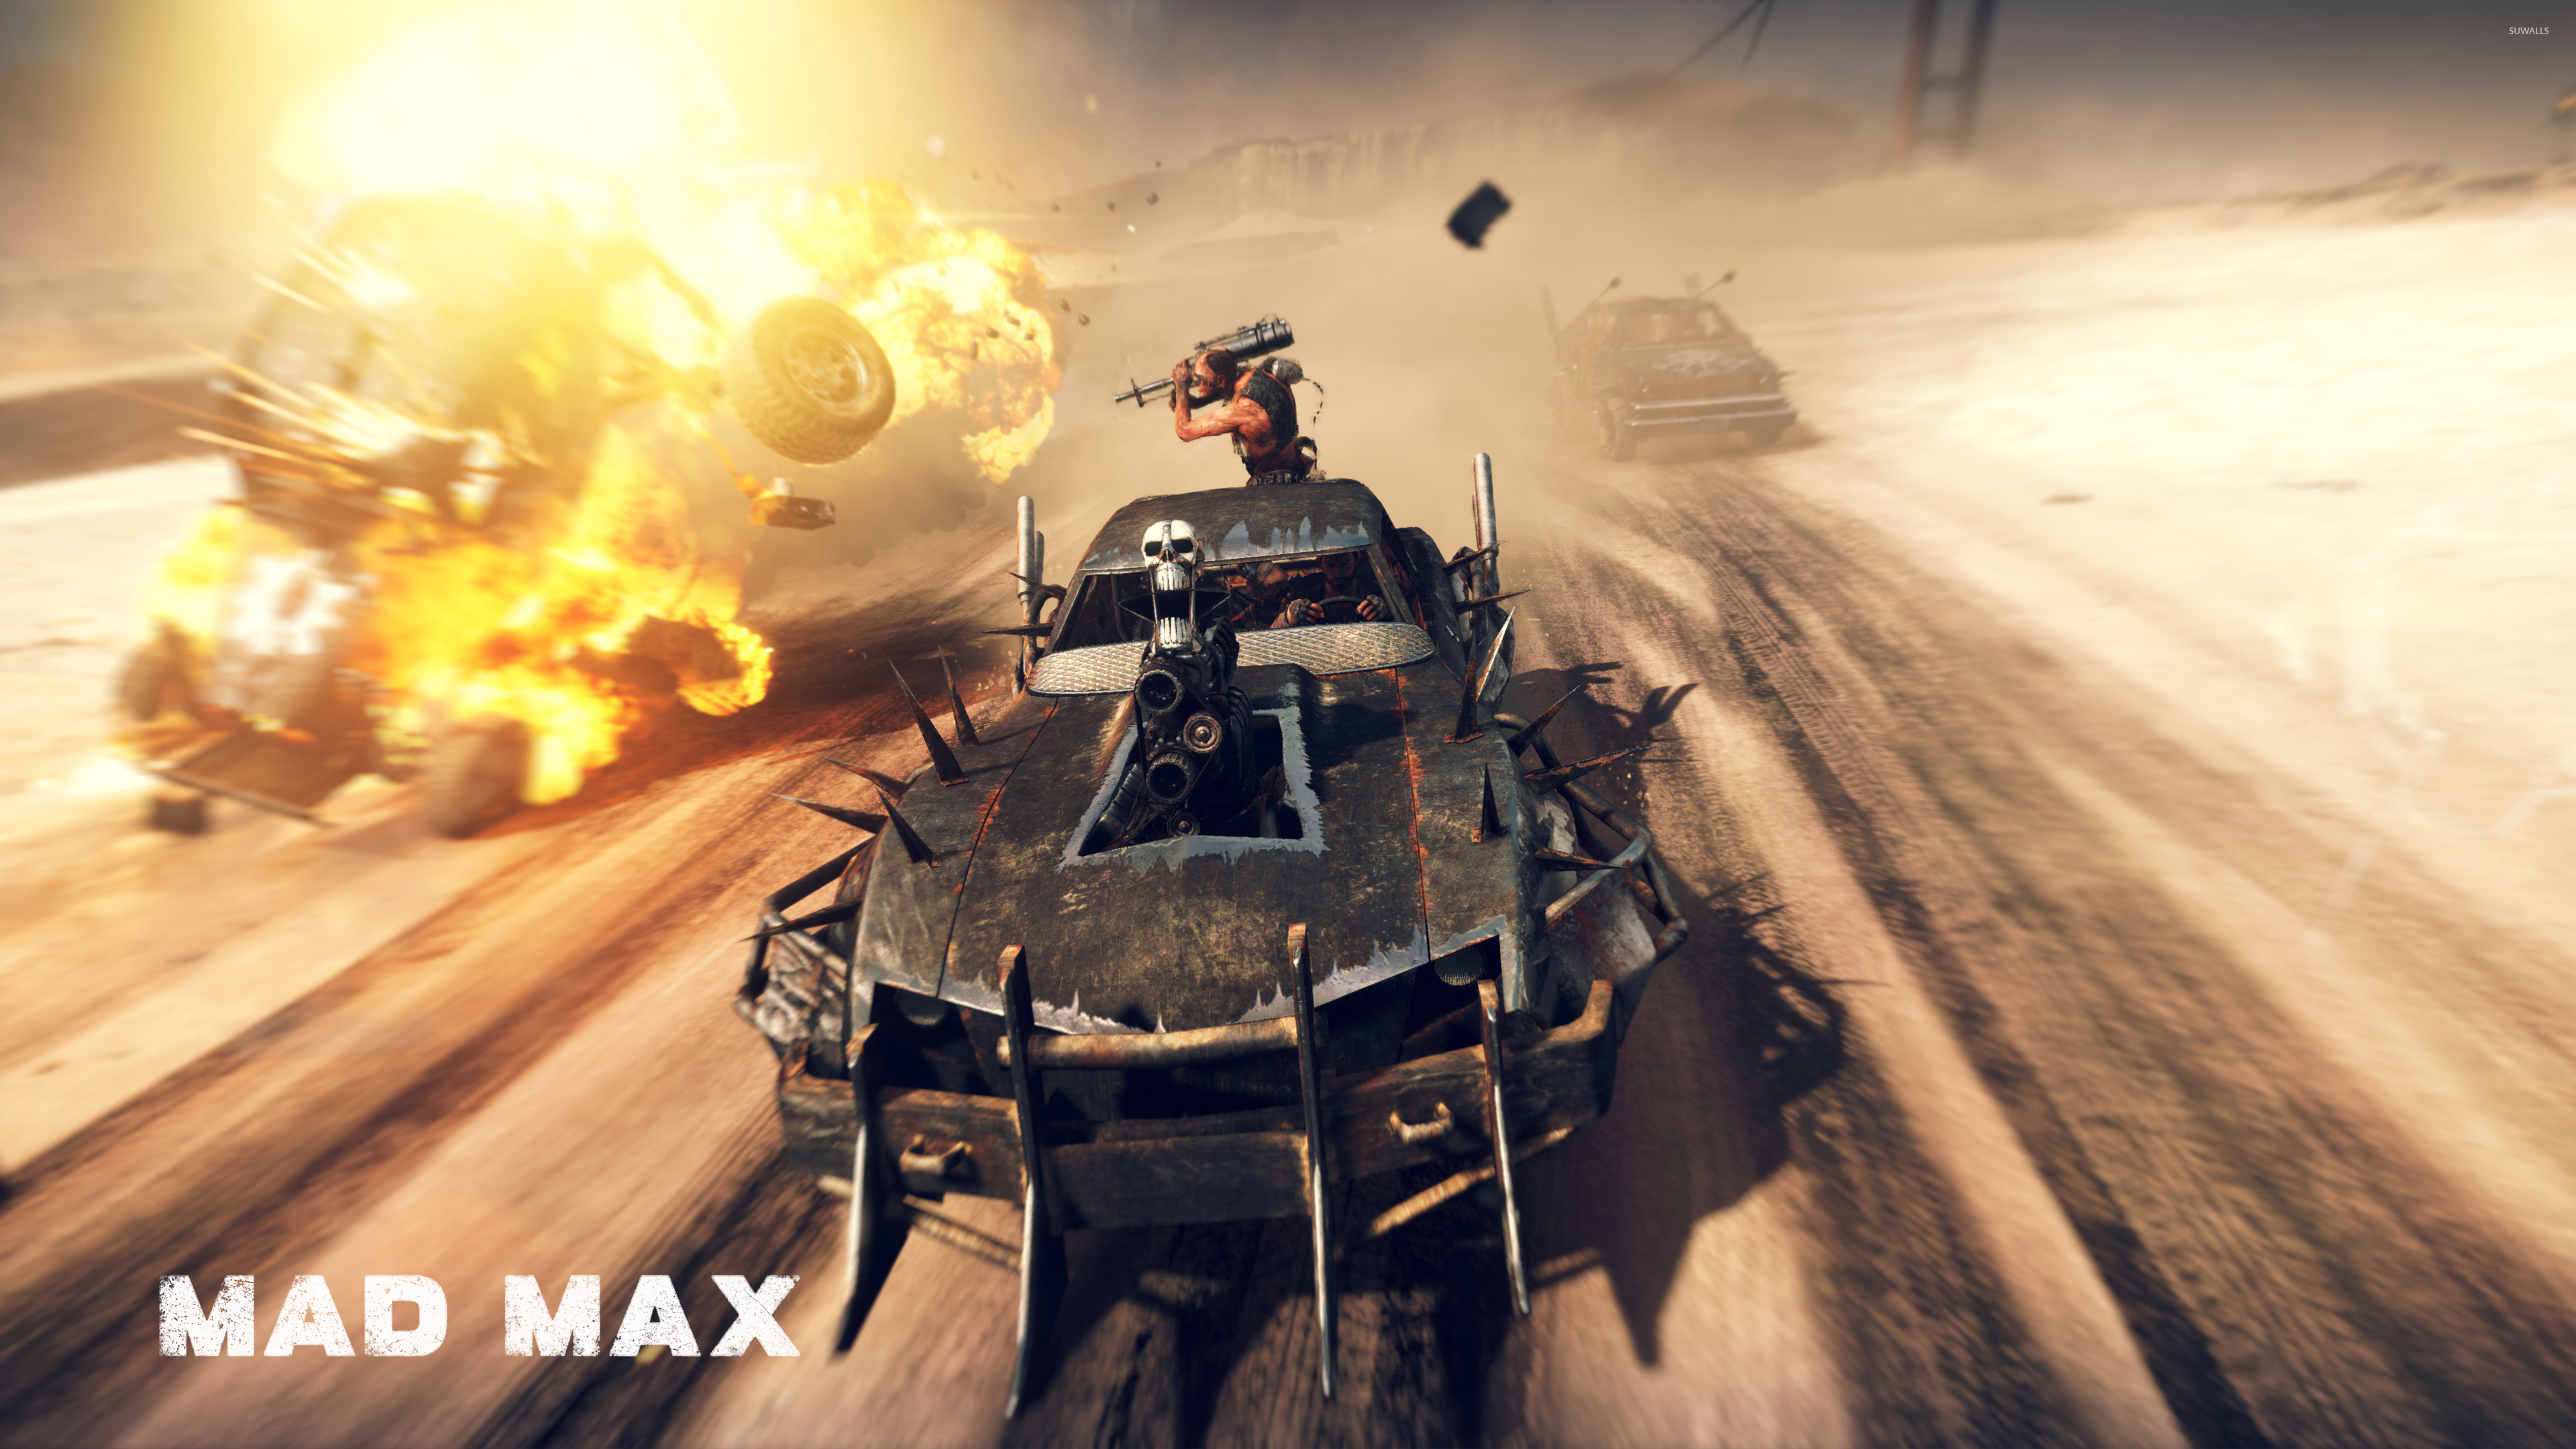 Furnace in Mad Max wallpaper   Game wallpapers   49584